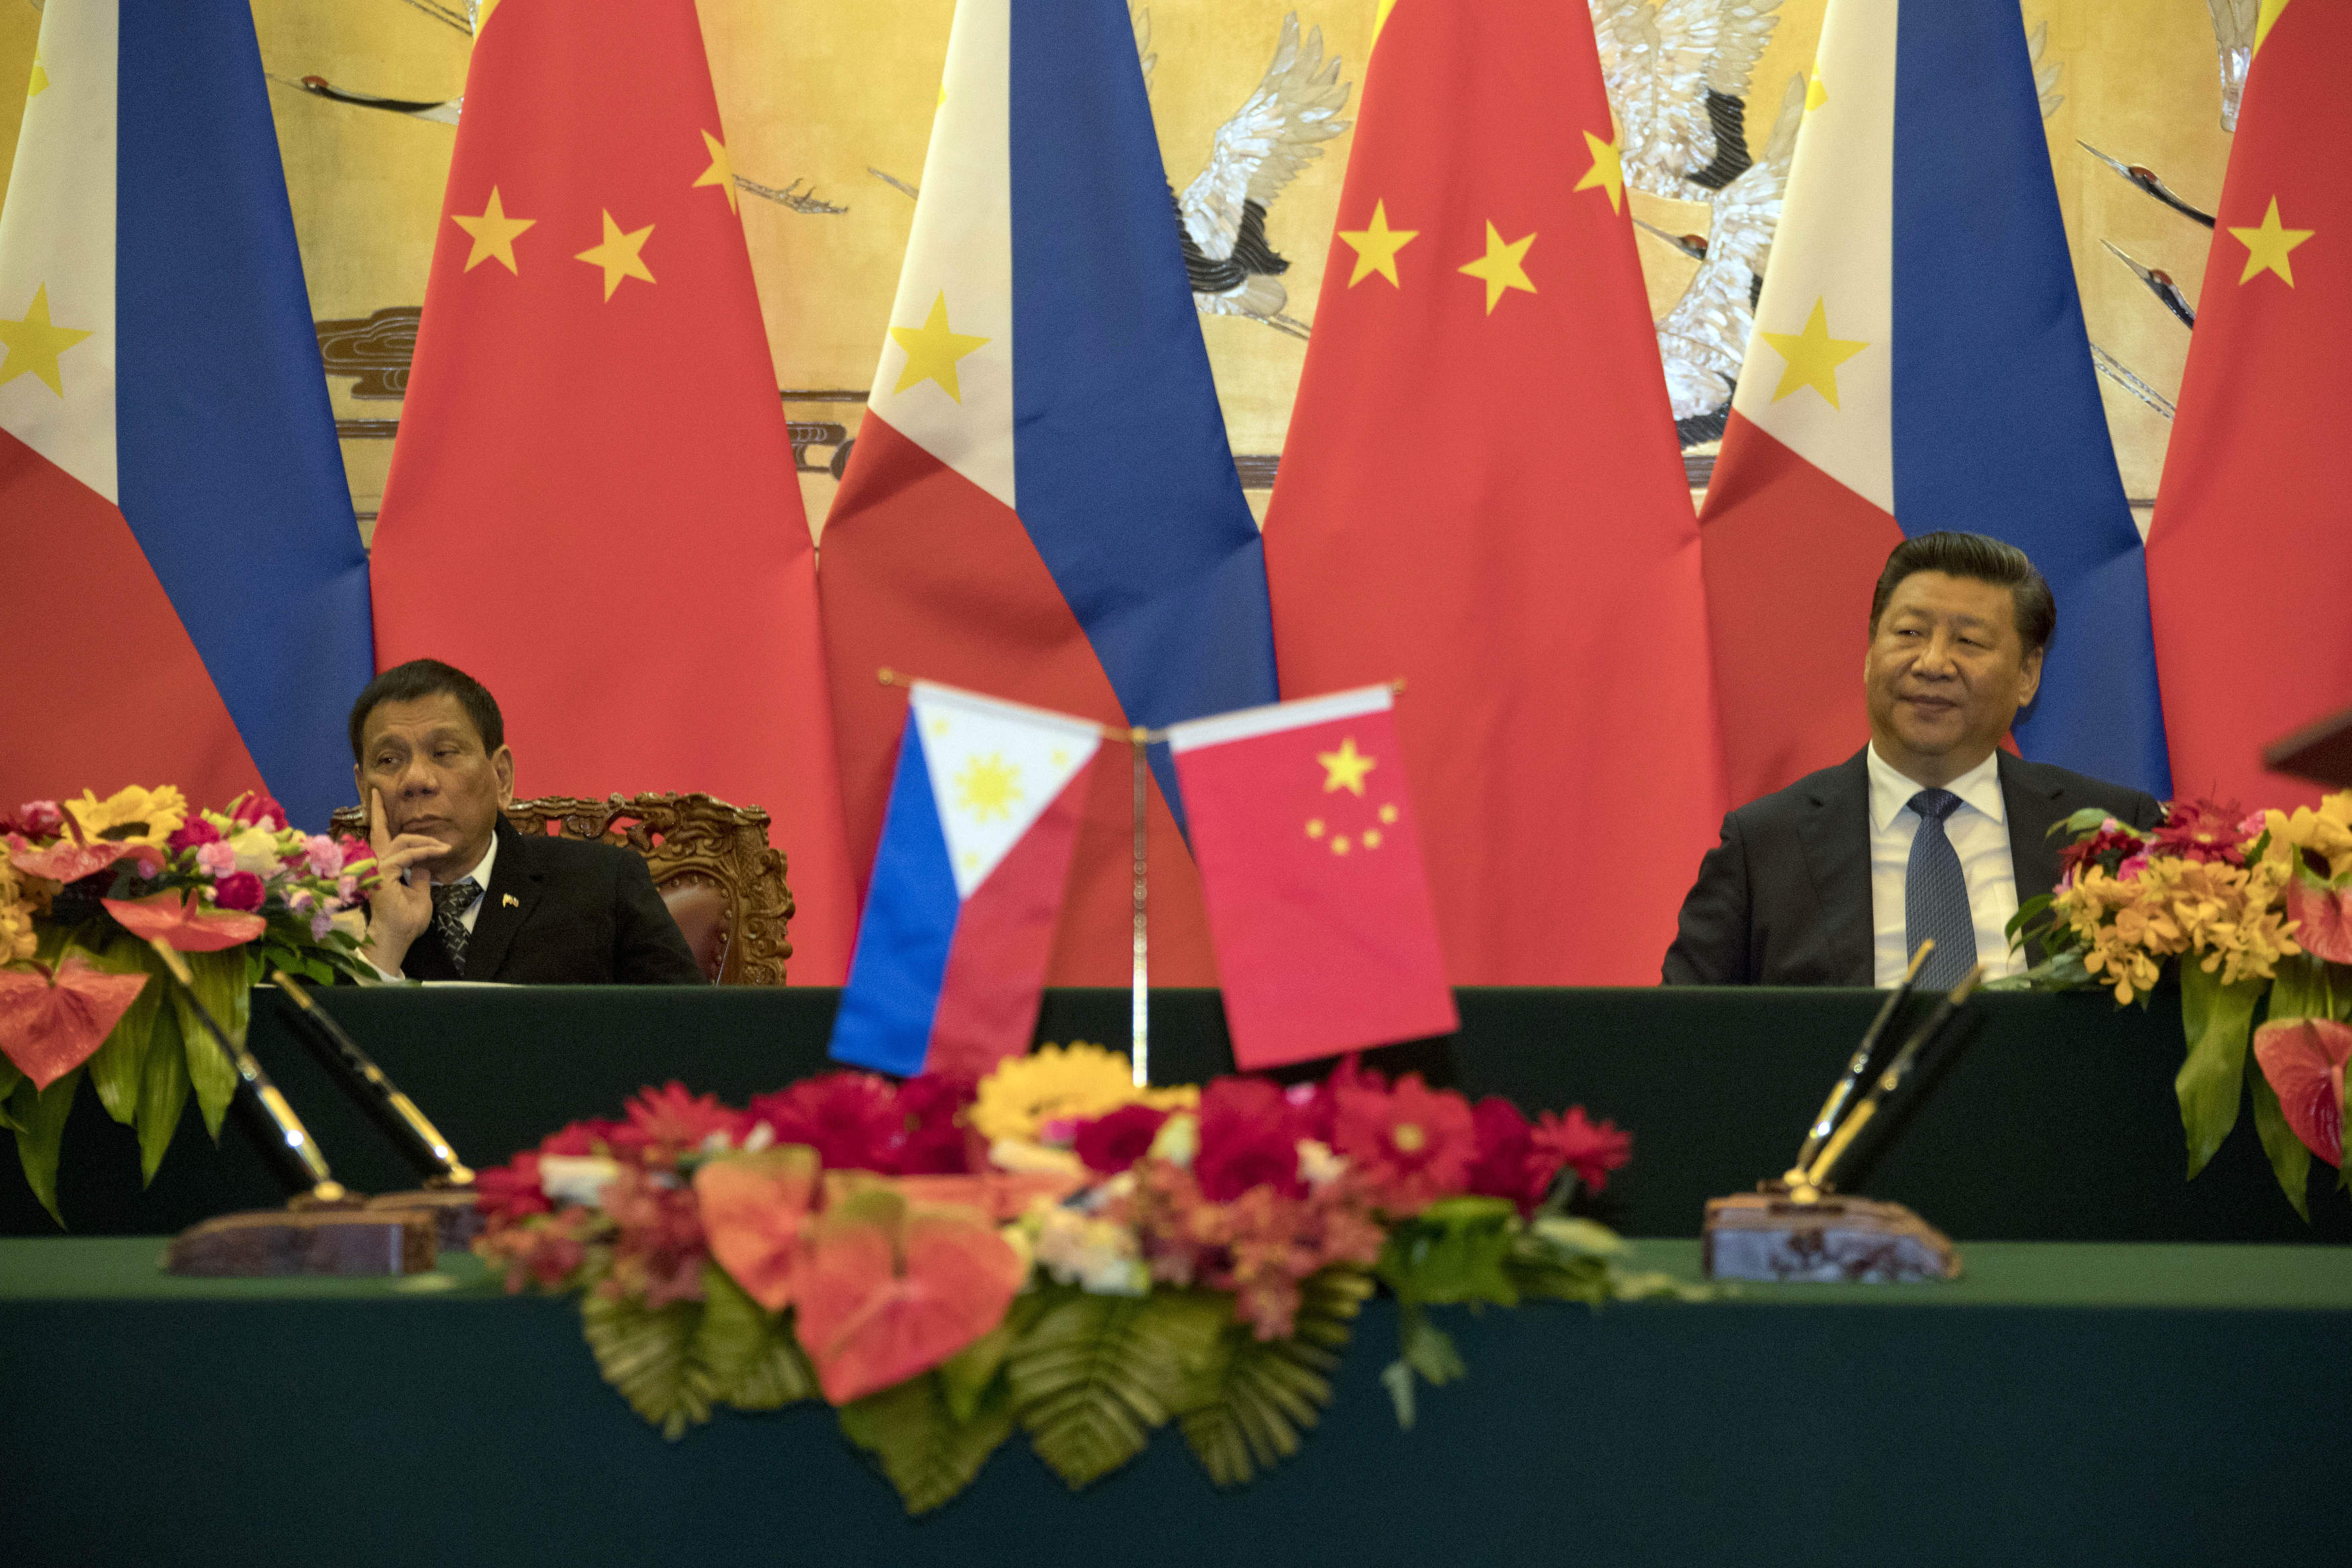 Philippine President Rodrigo Duterte, left and Chinese President Xi Jinping attend a signing ceremony on October 20, 2016 in Beijing, China. (Pool—Getty Images)